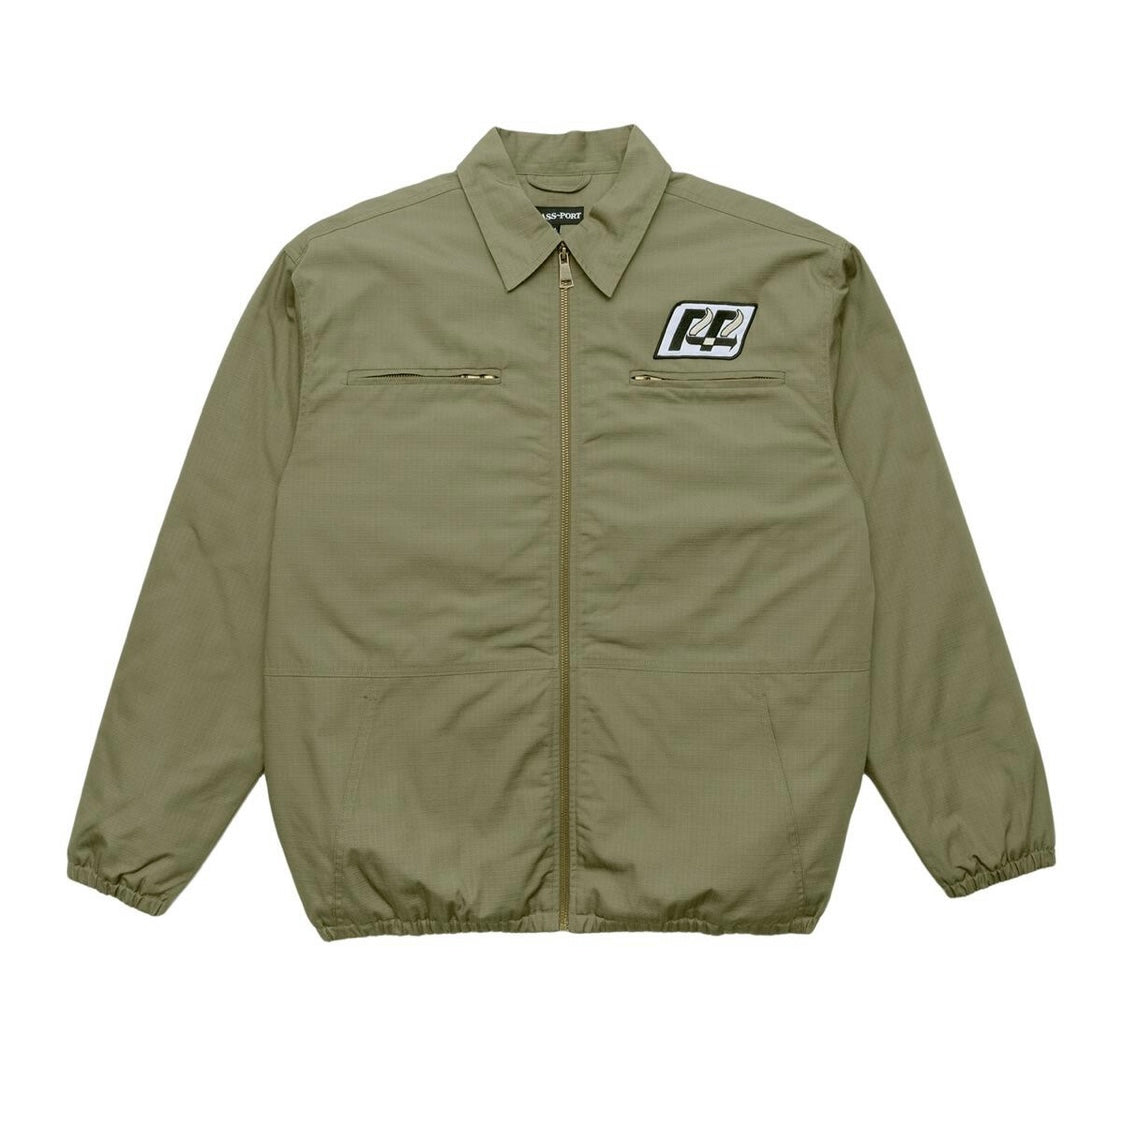 Pass~Port “Transport Ripstop Delivery Jacket”